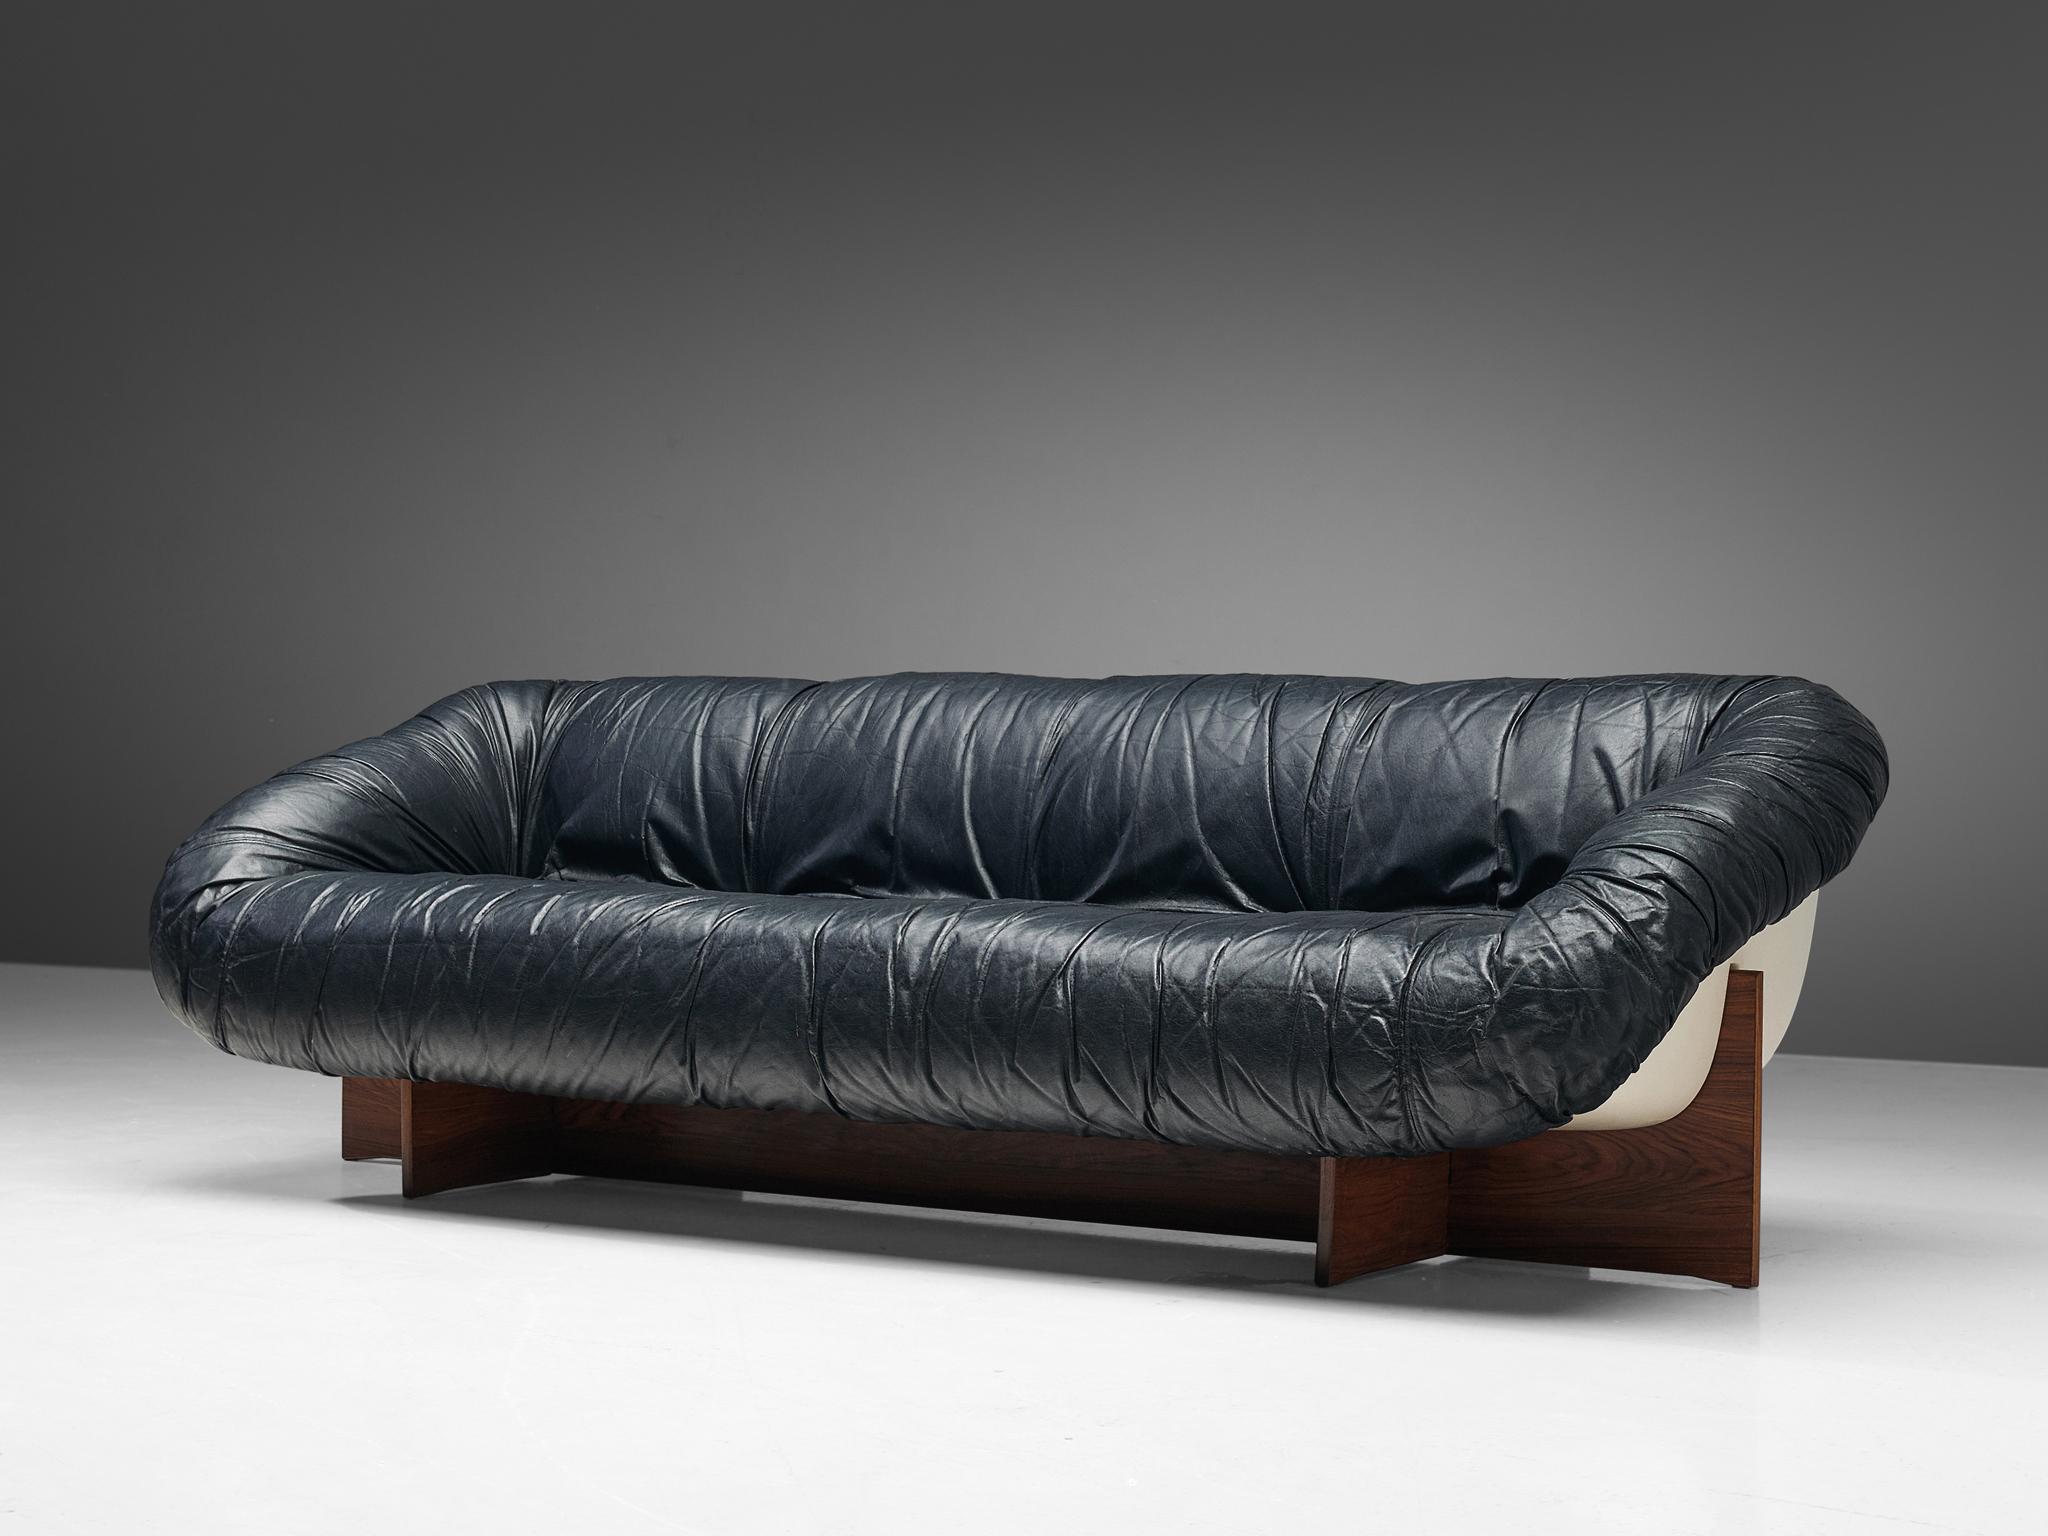 Mid-Century Modern Percival Lafer Sofa in Black Leather 